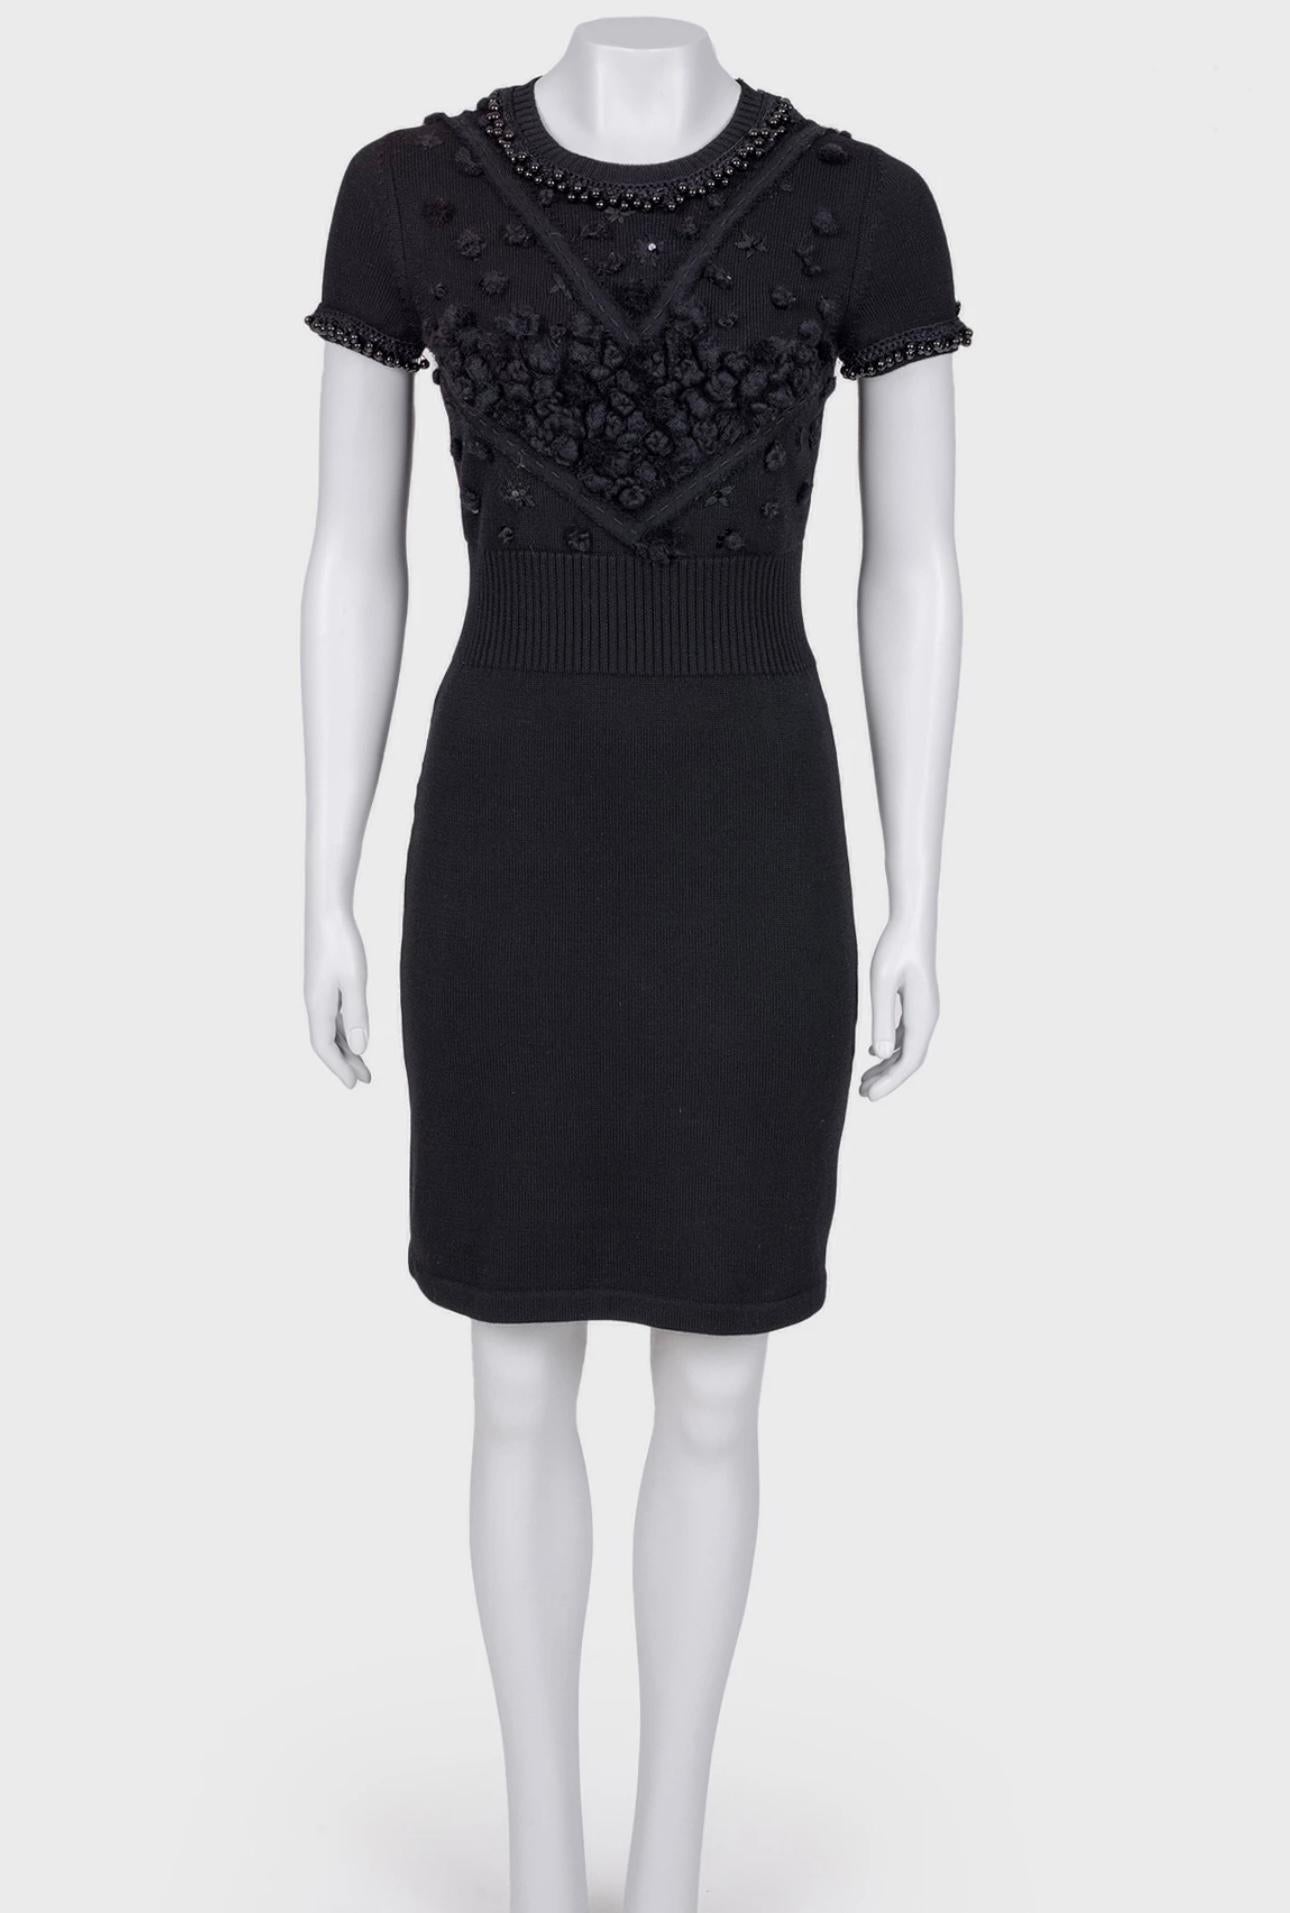 Chanel Pearl Embellished Black Dress with Couture Appliques For Sale 1